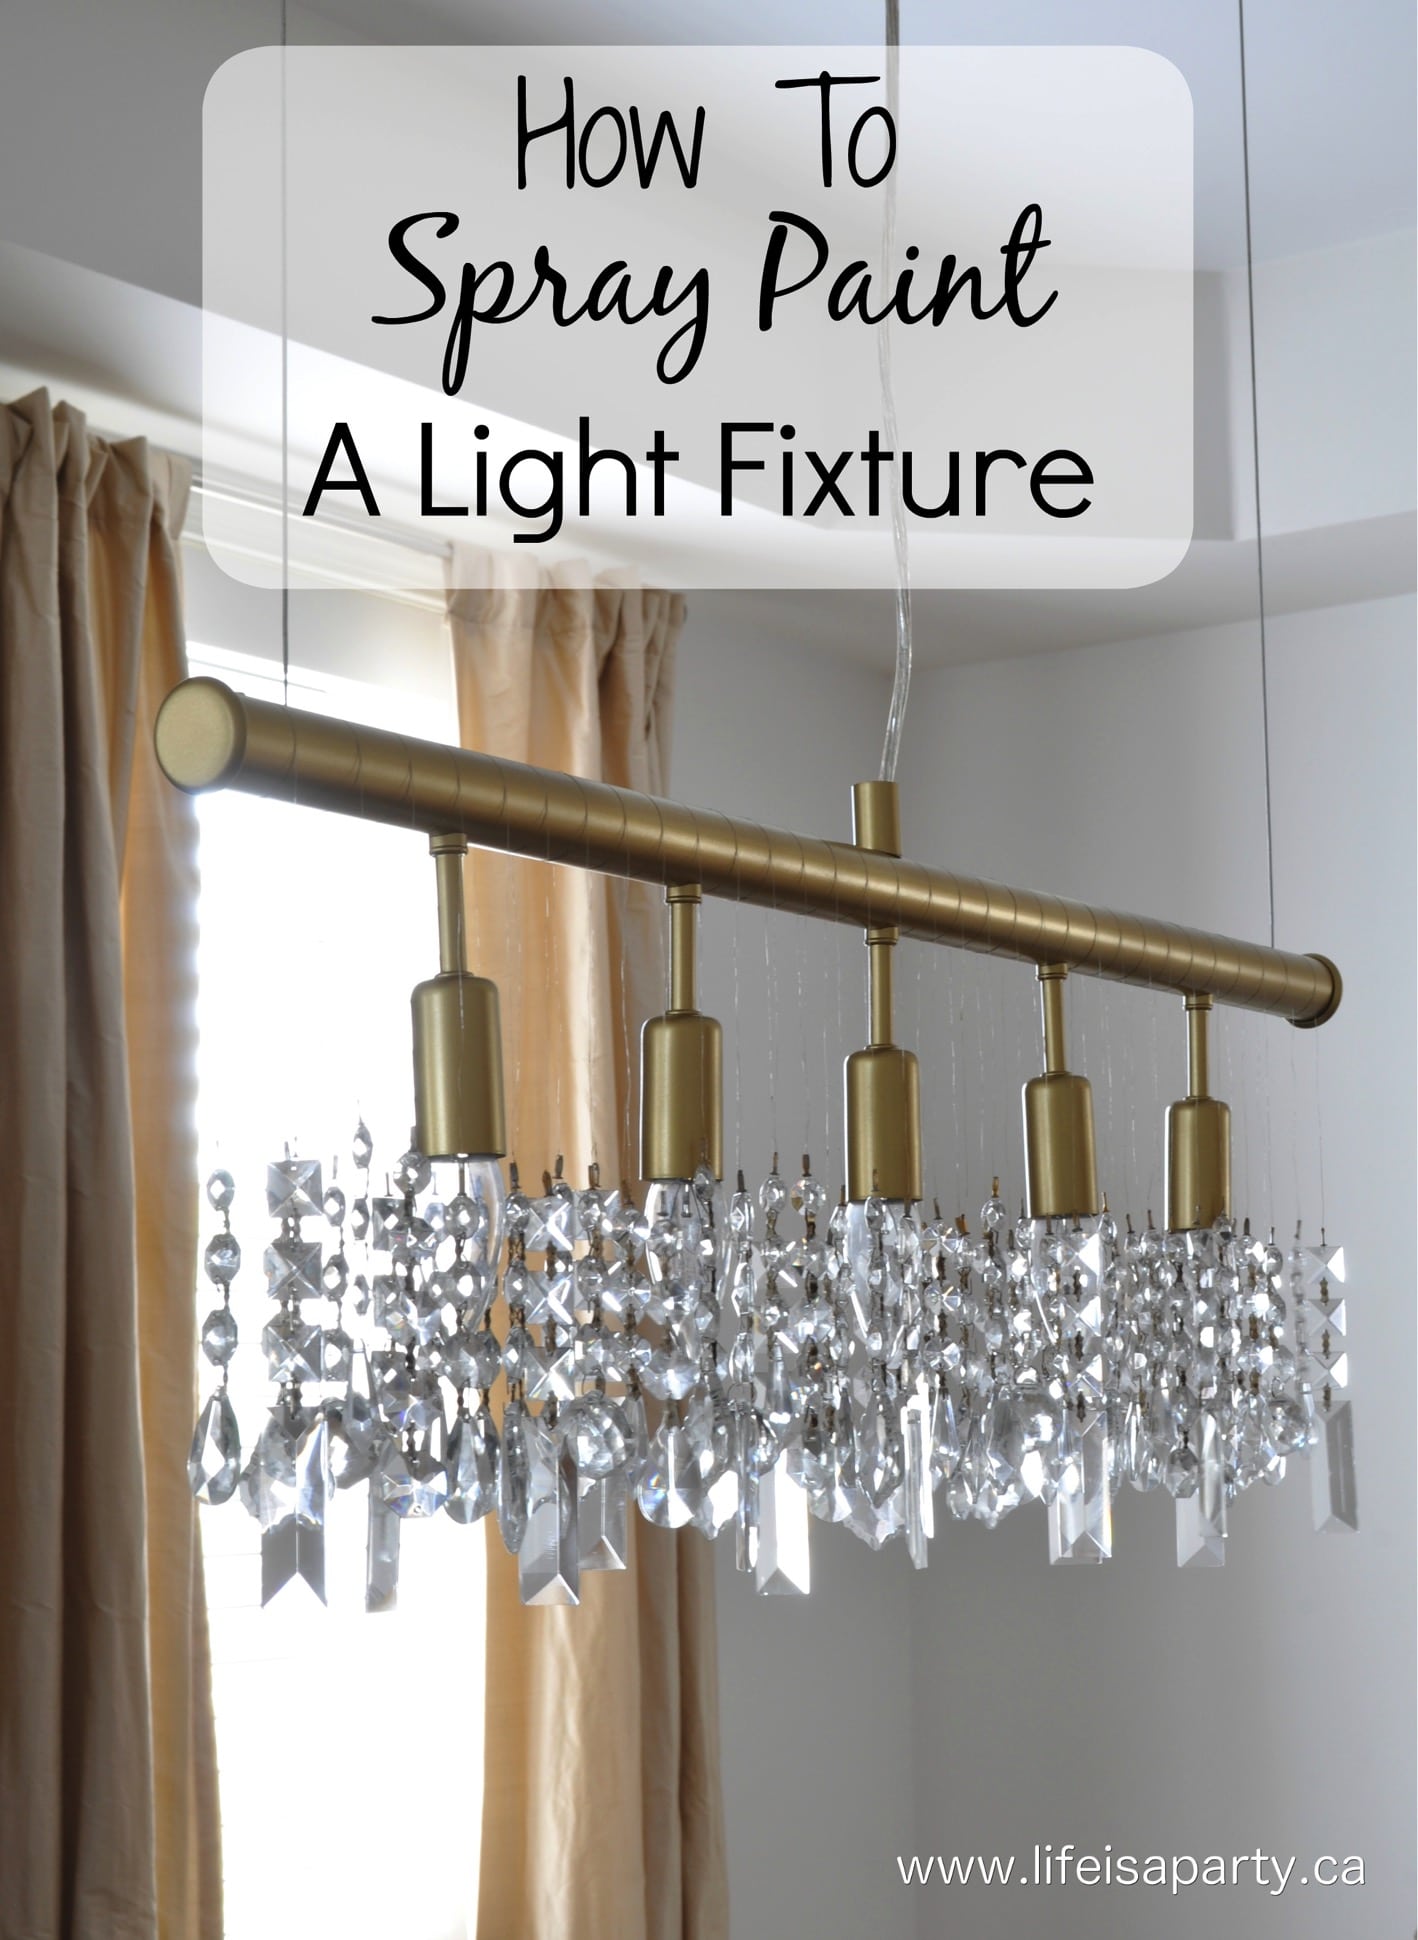 How To Spray Paint A Light Fixture: From boring silver to gold statement light with a little spray paint.